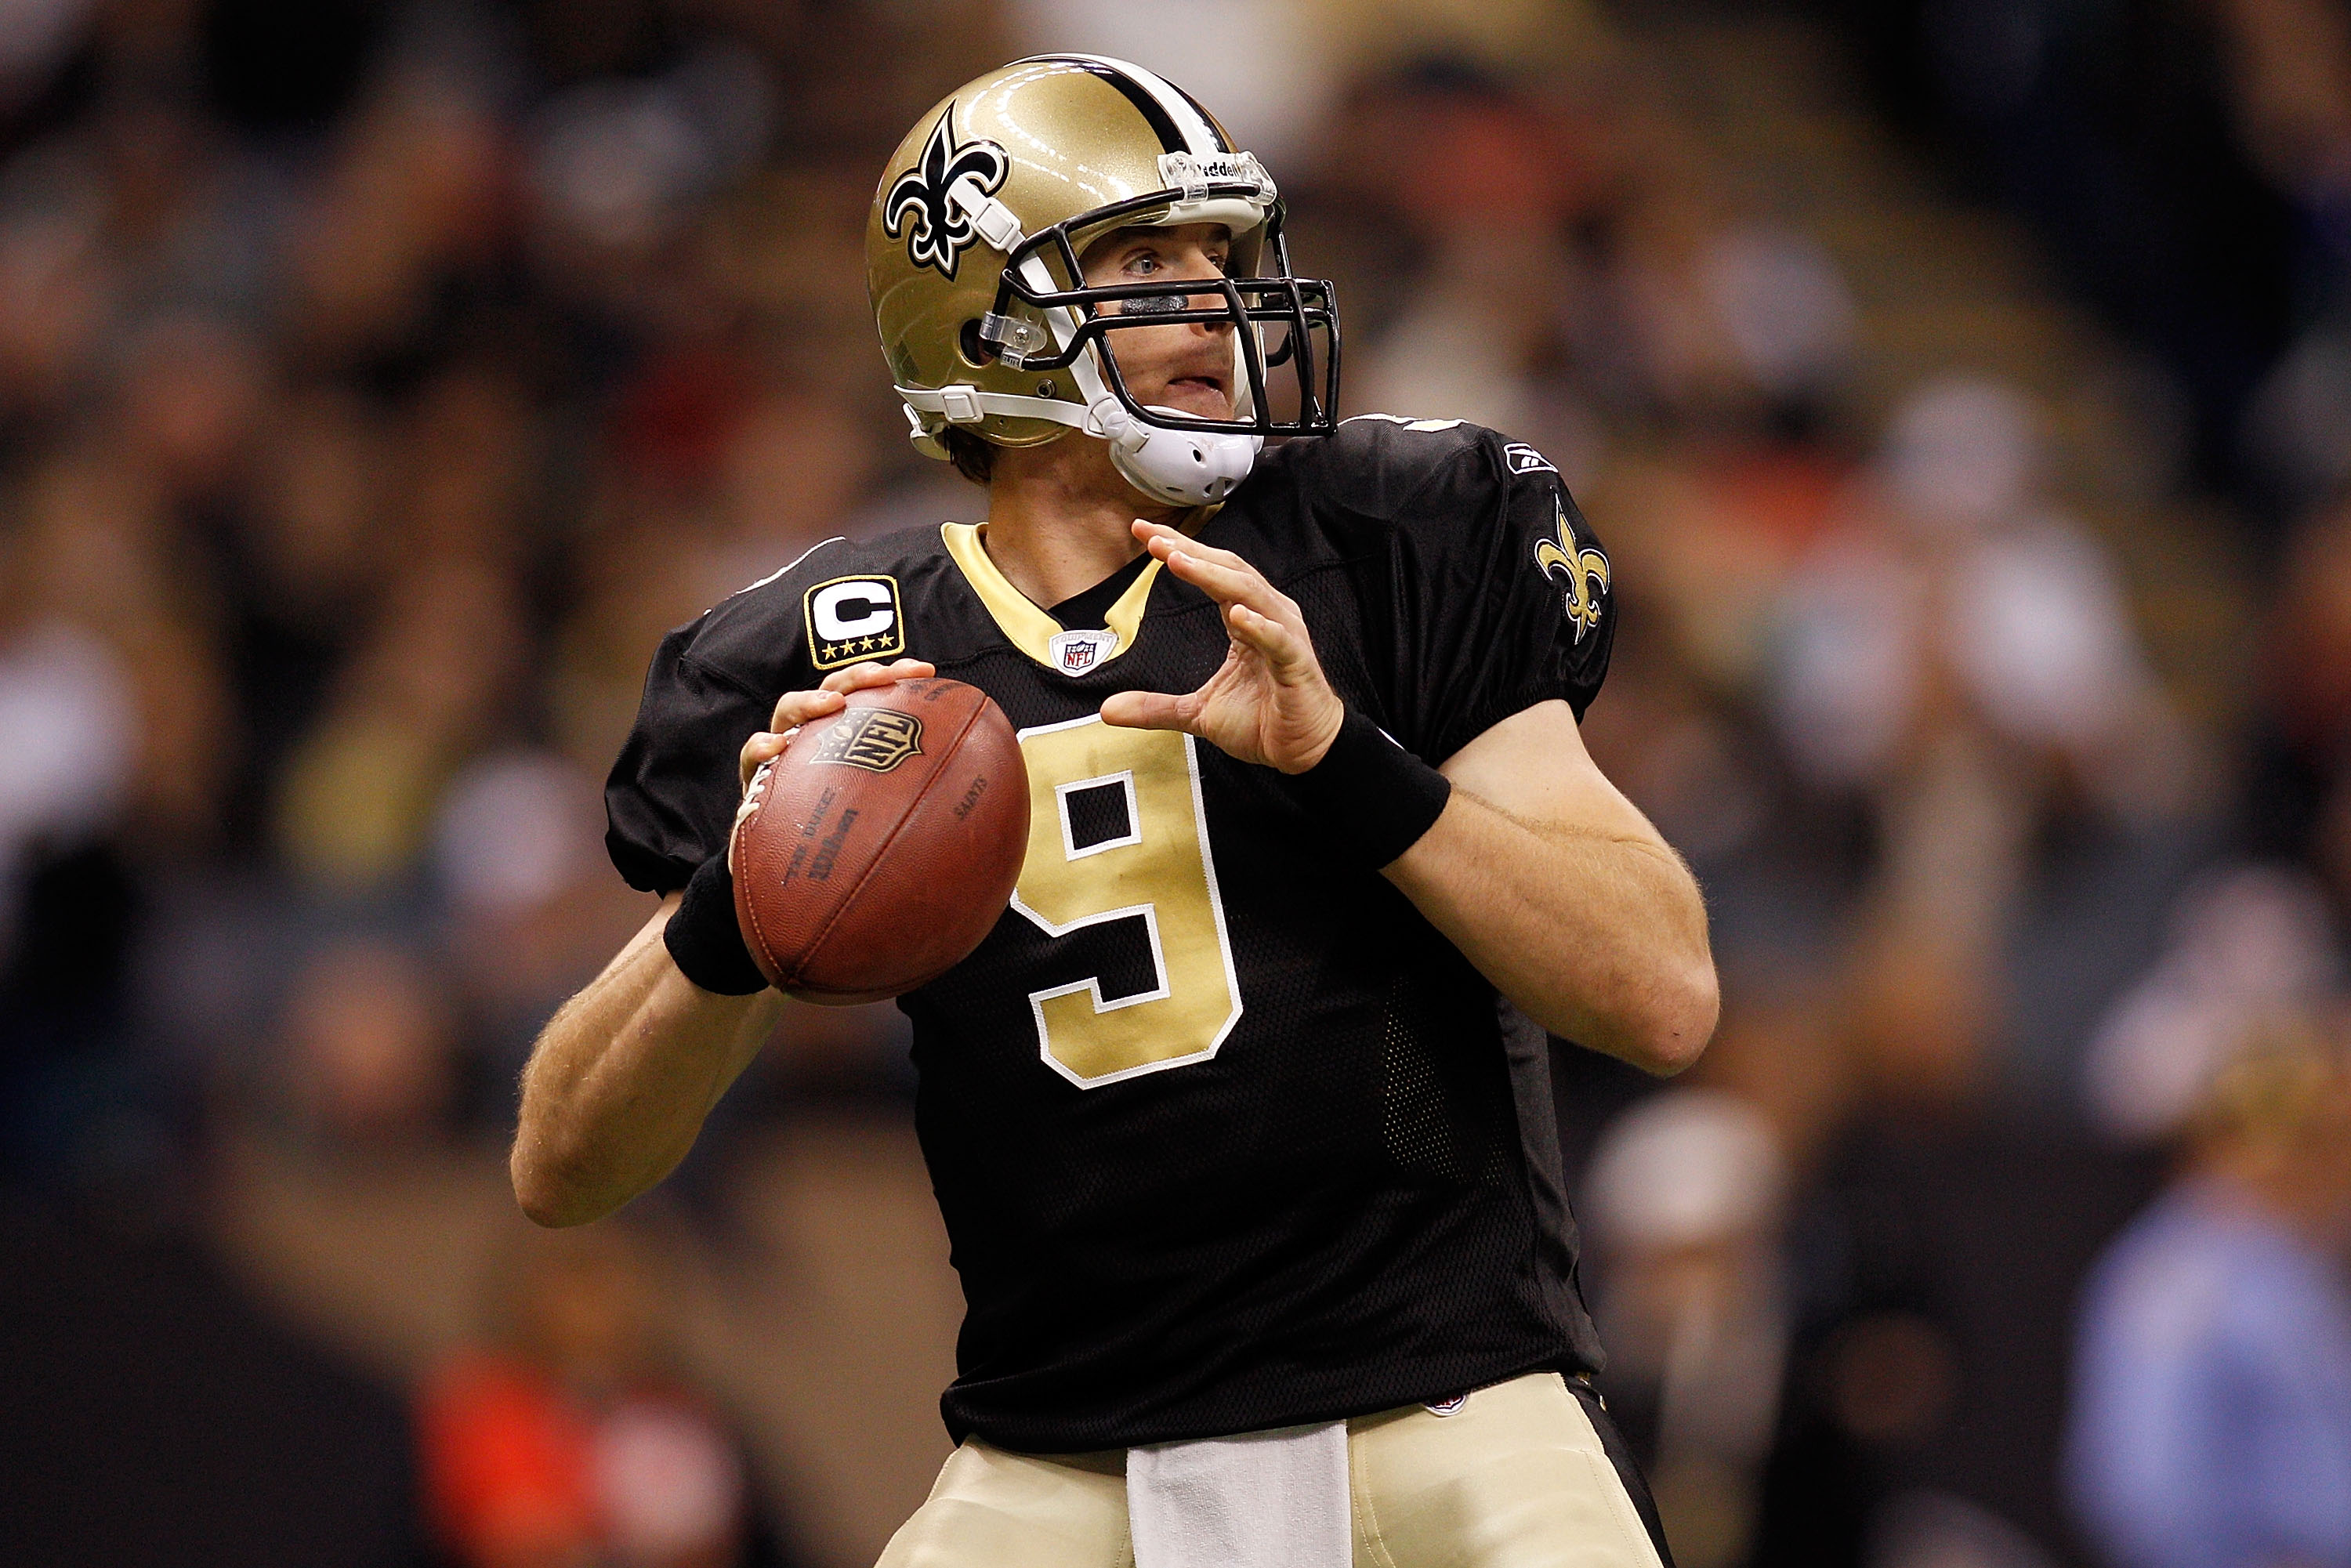 NEW ORLEANS, LA - DECEMBER 12:  Drew Brees #9  of the New Orleans Saints looks to throw the ball during the game against the St. Louis Rams at the Louisiana Superdome on December 12, 2010 in New Orleans, Louisiana.  (Photo by Chris Graythen/Getty Images)